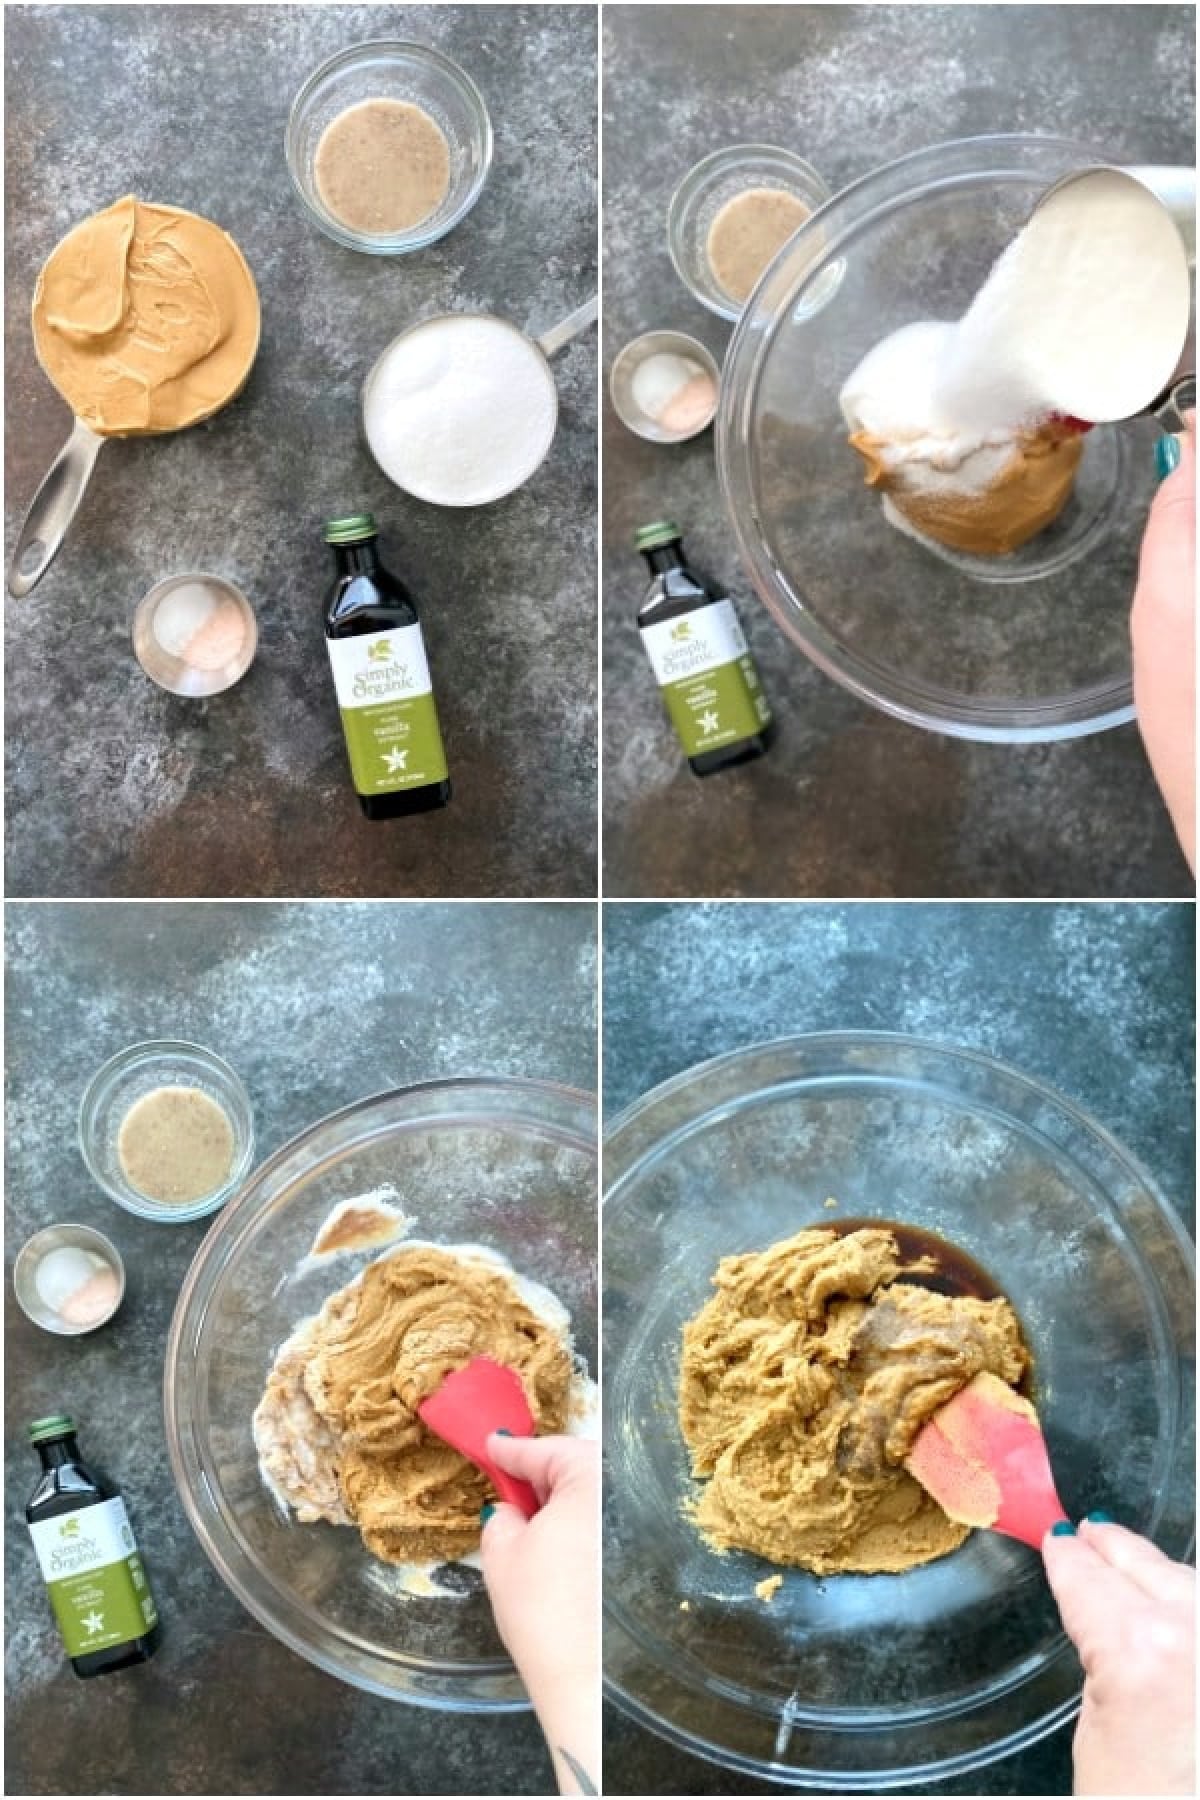 Four image collage showing How To Make Almond Butter Cookies: measuring cups of almond butter, sugar, almond flour, vanilla, flax egg, and baking powder